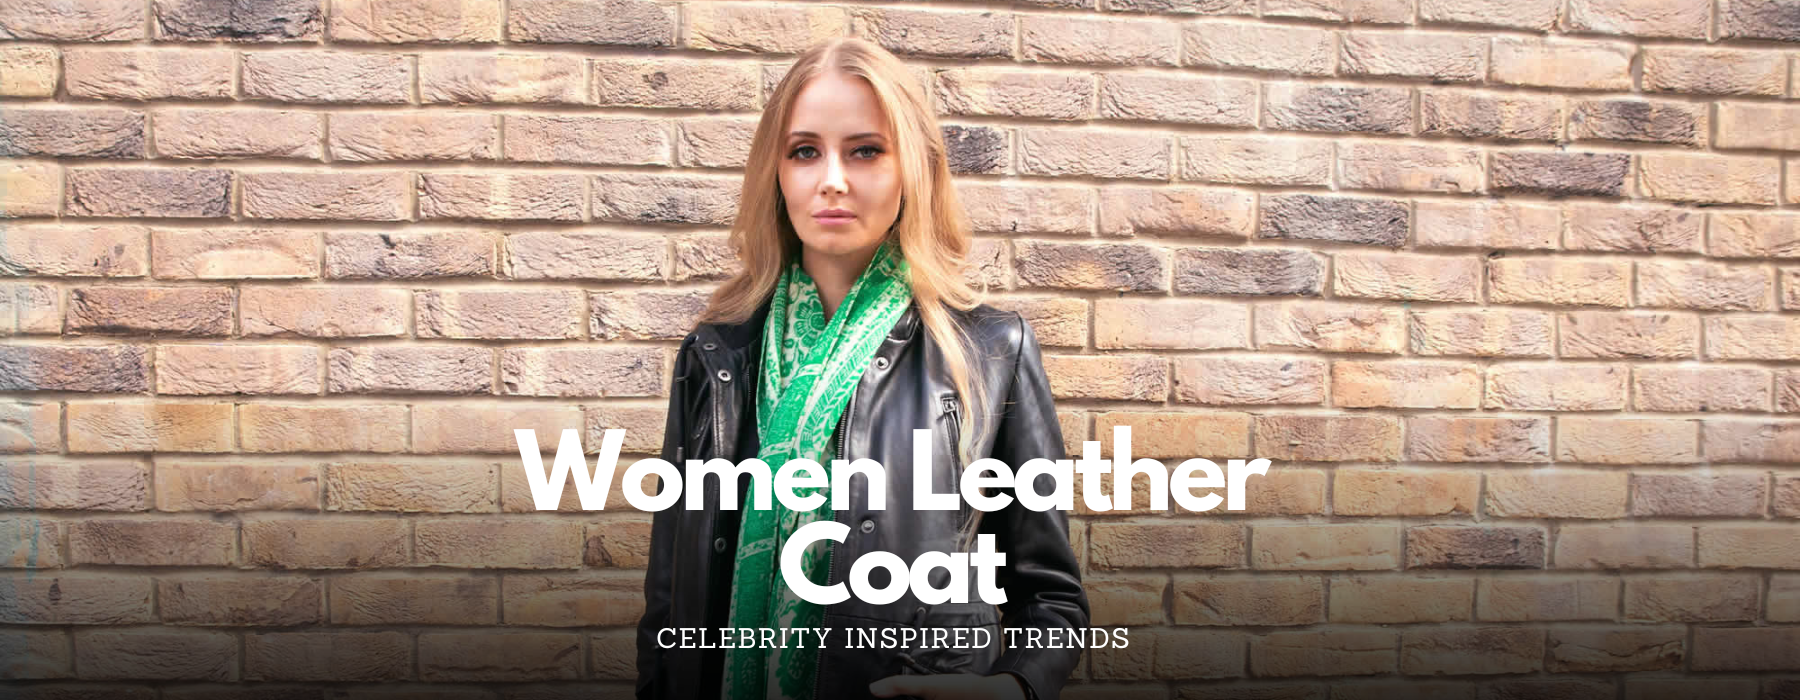 From Runway to Street: Celebrity-Inspired Women's Leather Coats